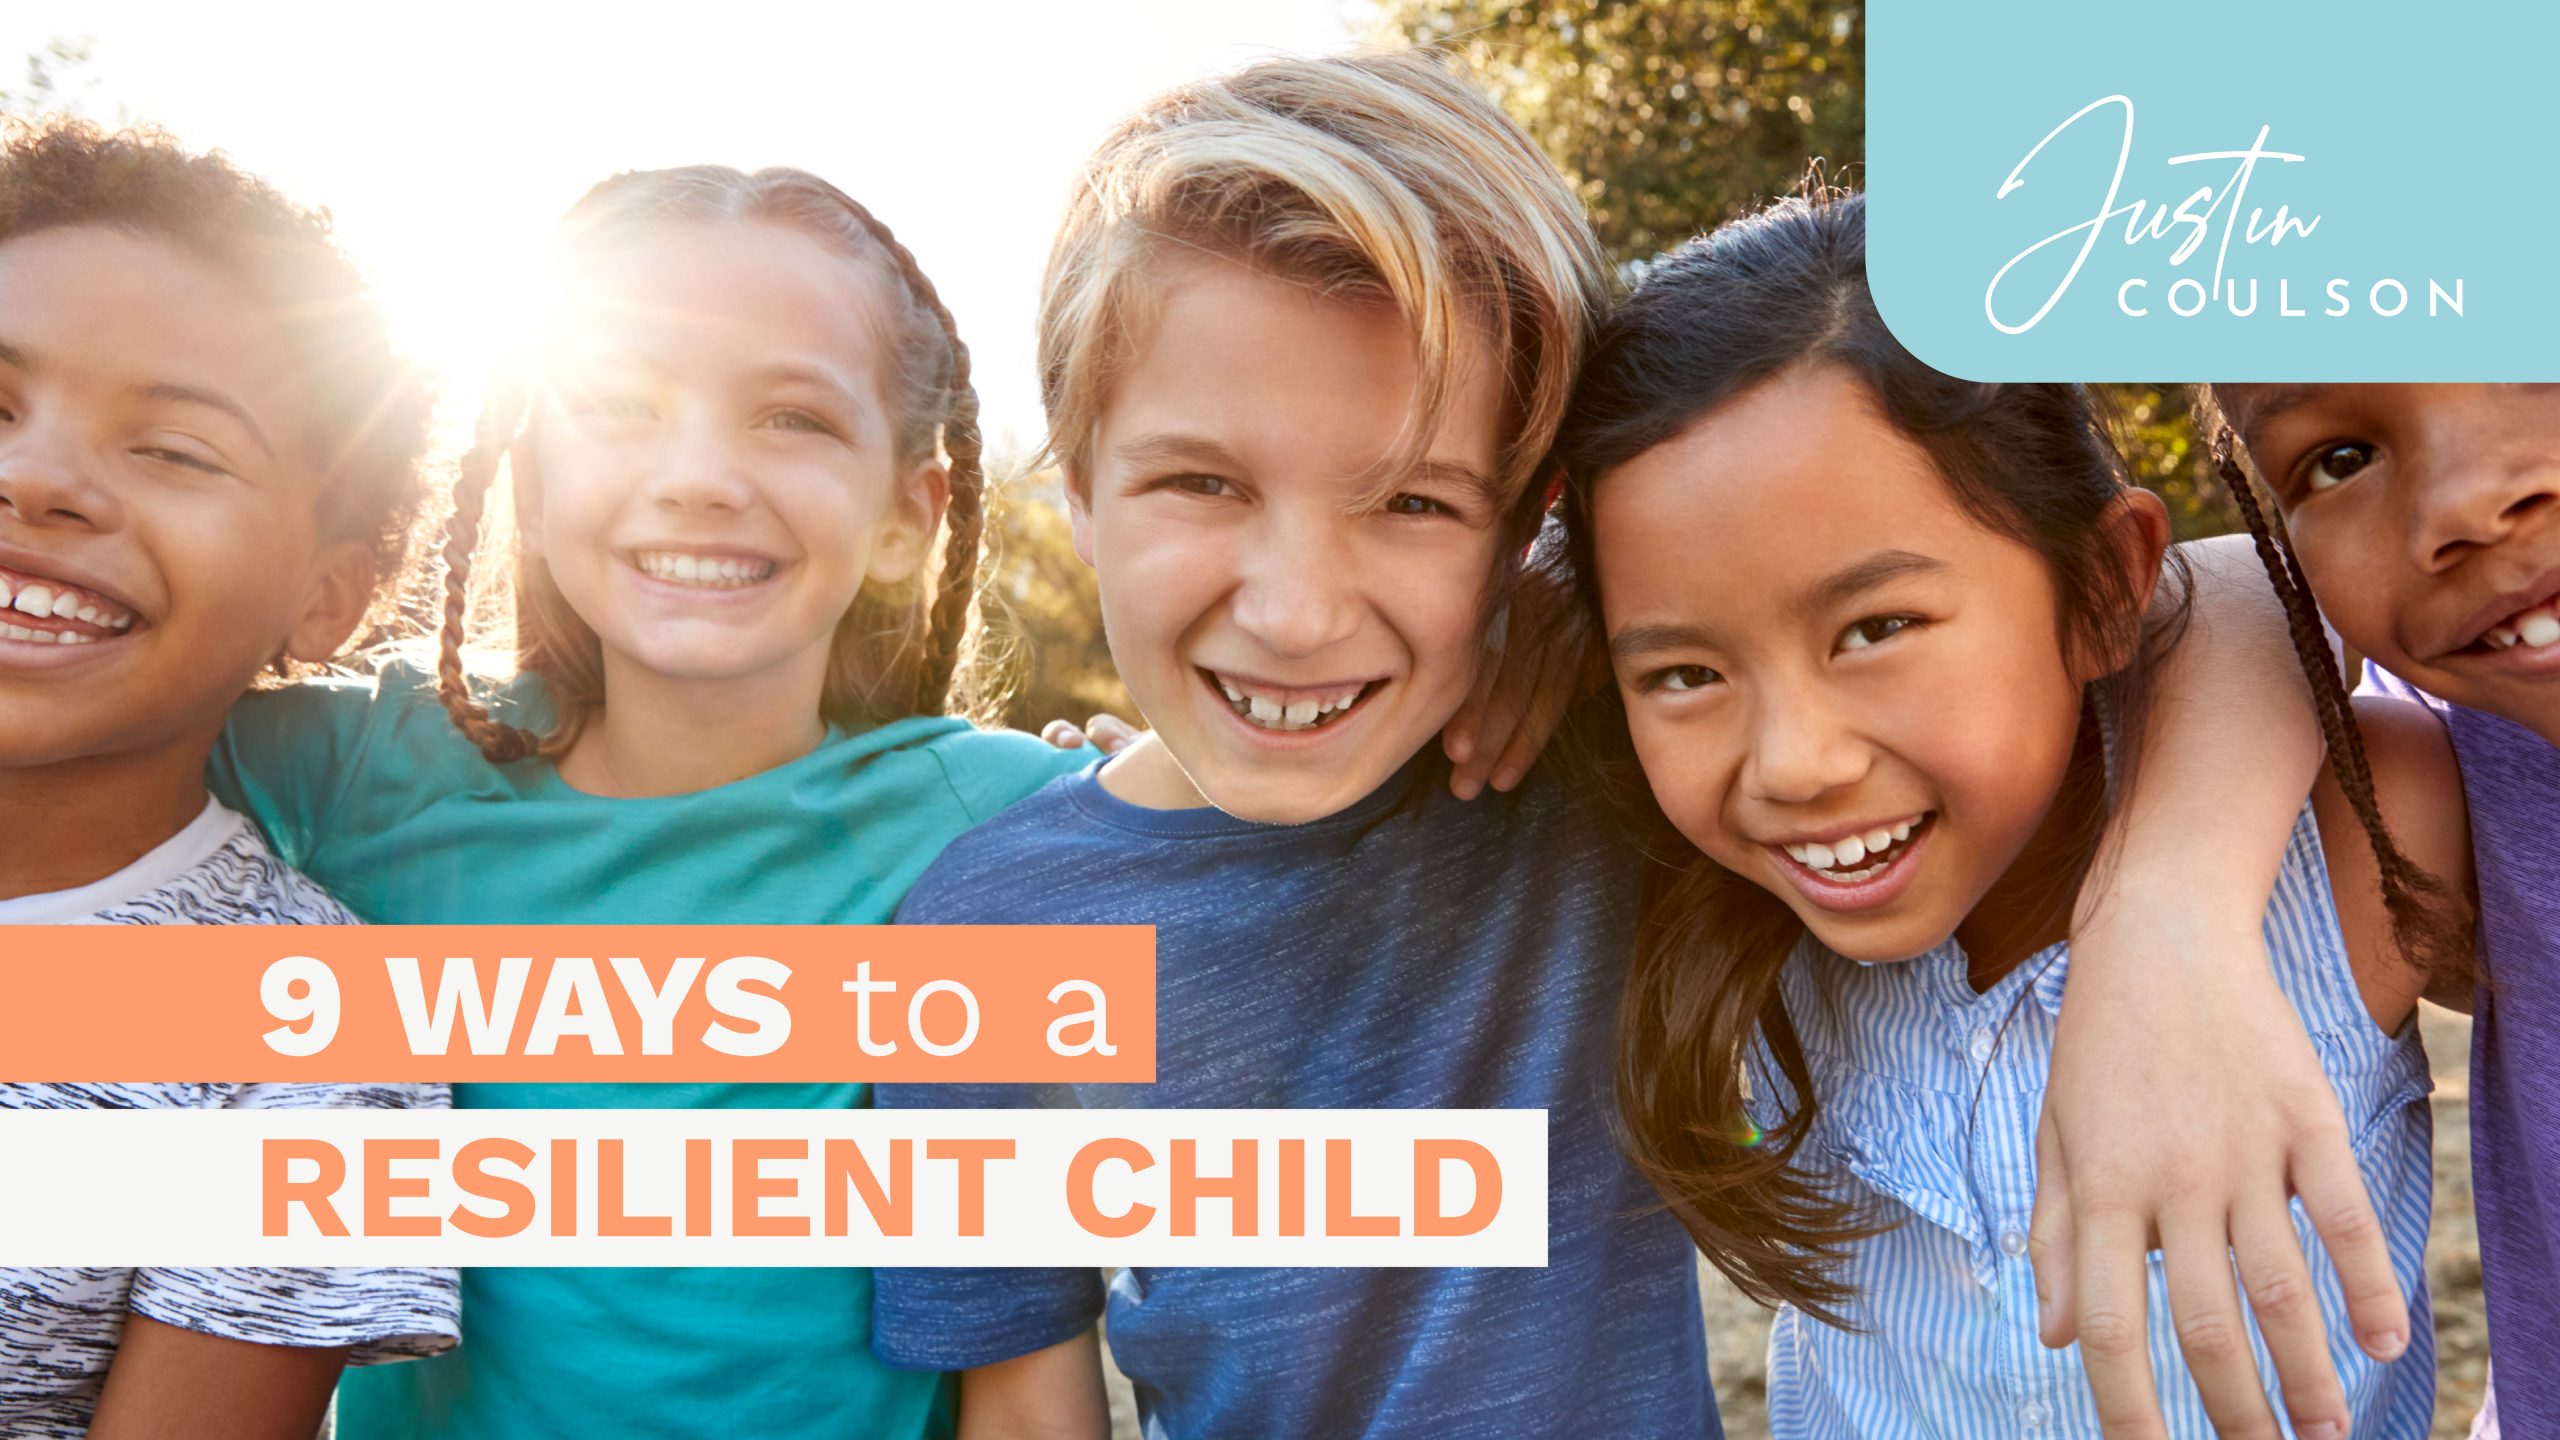 9 ways to a resilient child Justin Coulson